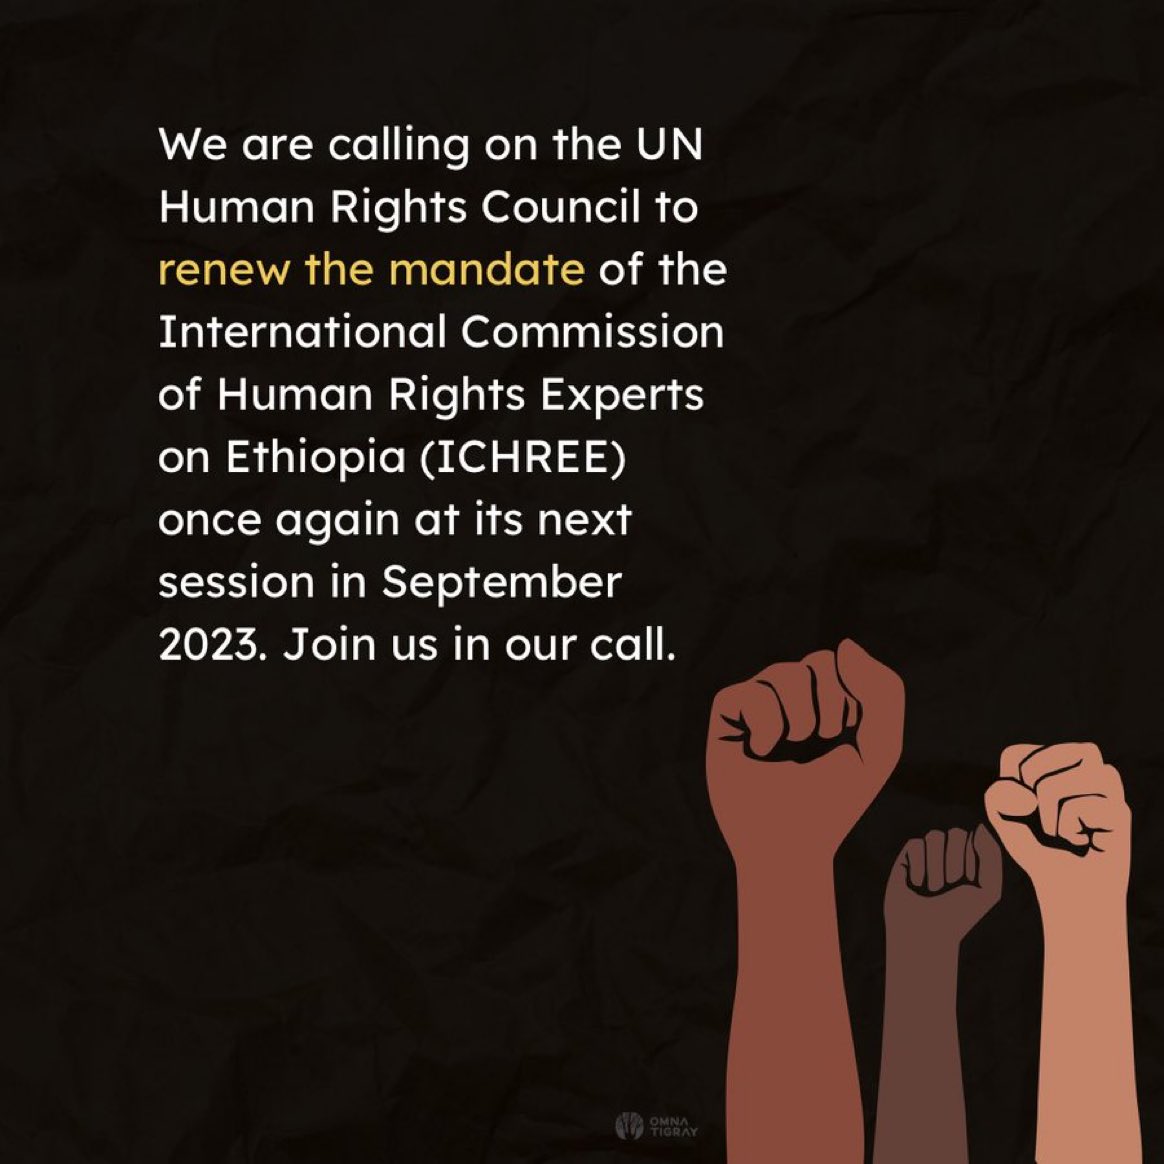 #TigrayCantWaitAnyLonger: Join us as we call on the @UN_HRC to renew the #ICHREE mandate in order to pursue an independent and thorough investigation into mass atrocities in Tigray. #Justice4Tigray @UNHumanRights @volker_turk 

#JusticeForTigrayPeople #Justice4Tigray